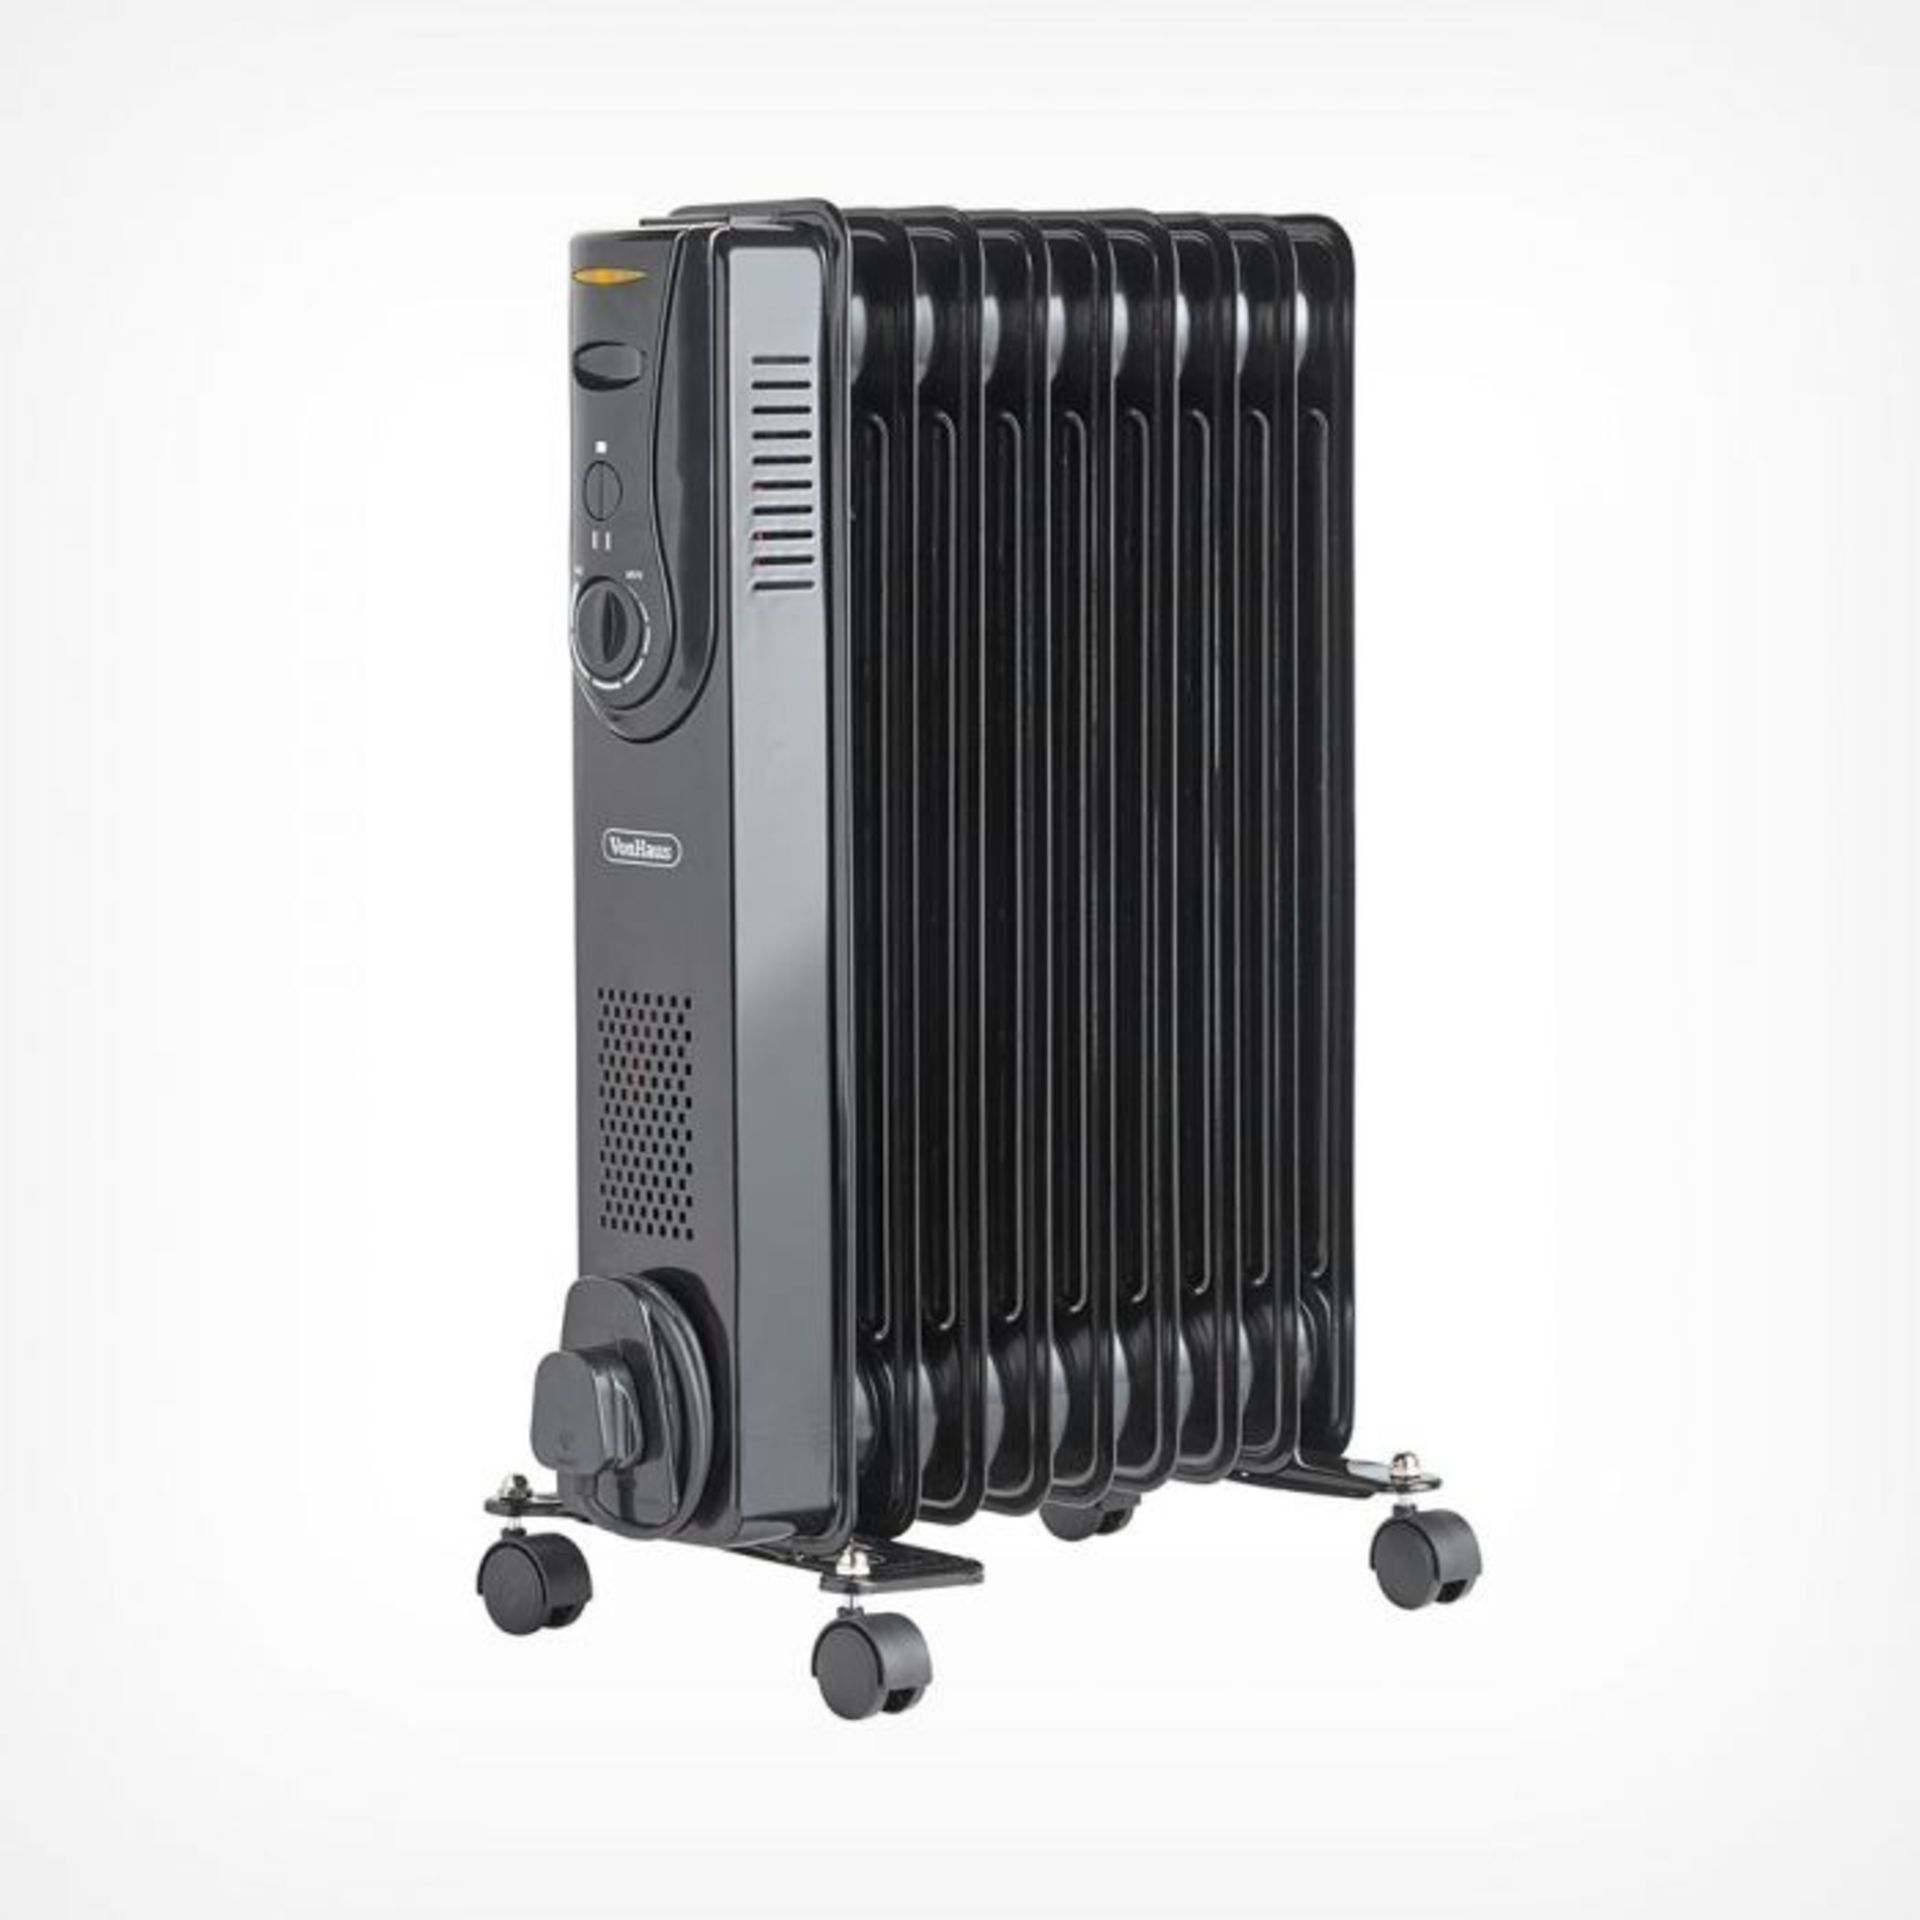 (S315) 9 Fin 2000W Oil Filled Radiator - Black Powerful 2000W radiator with 9 oil-filled fins ... - Image 6 of 8